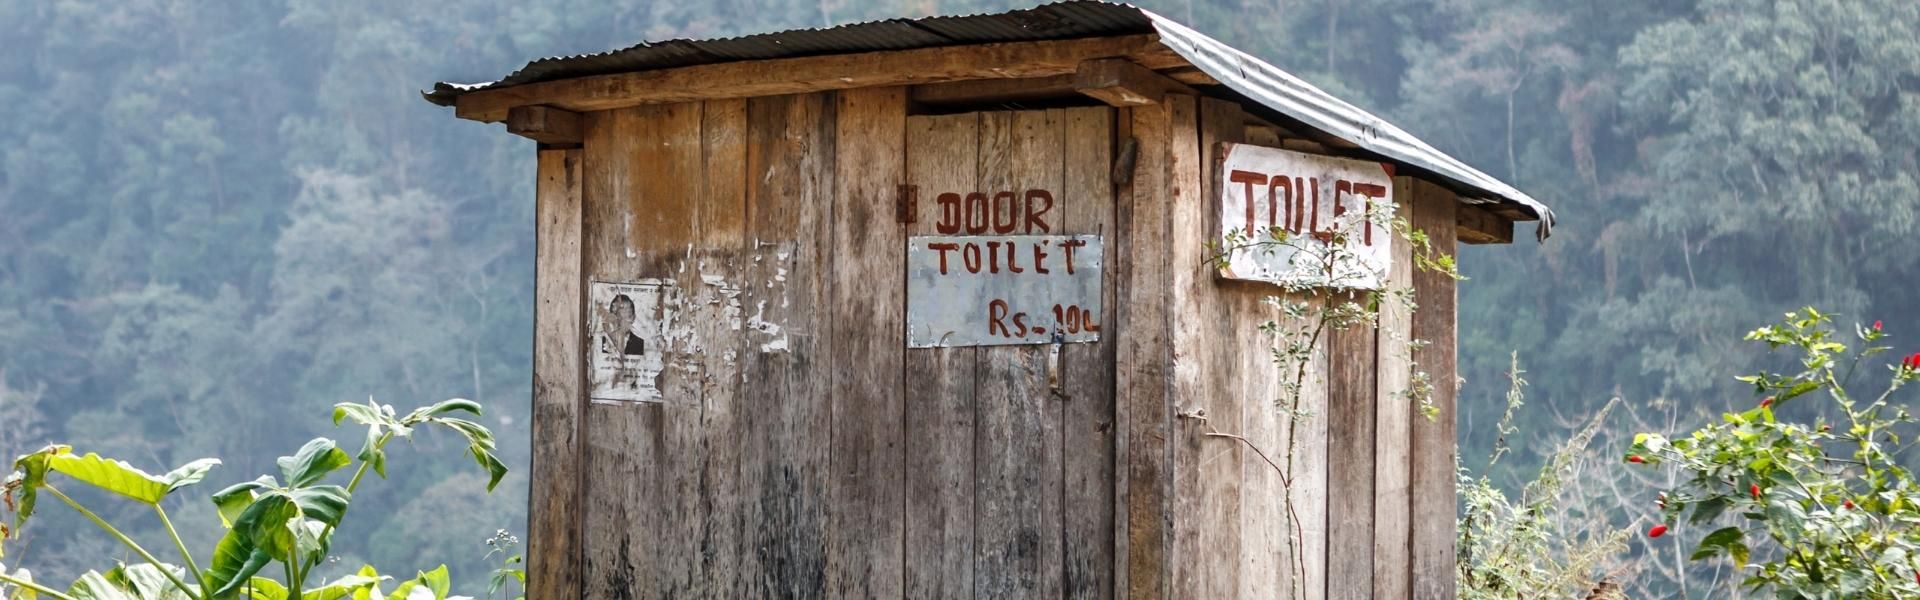 Toilets and Showers along the Manaslu Circuit Trek Route